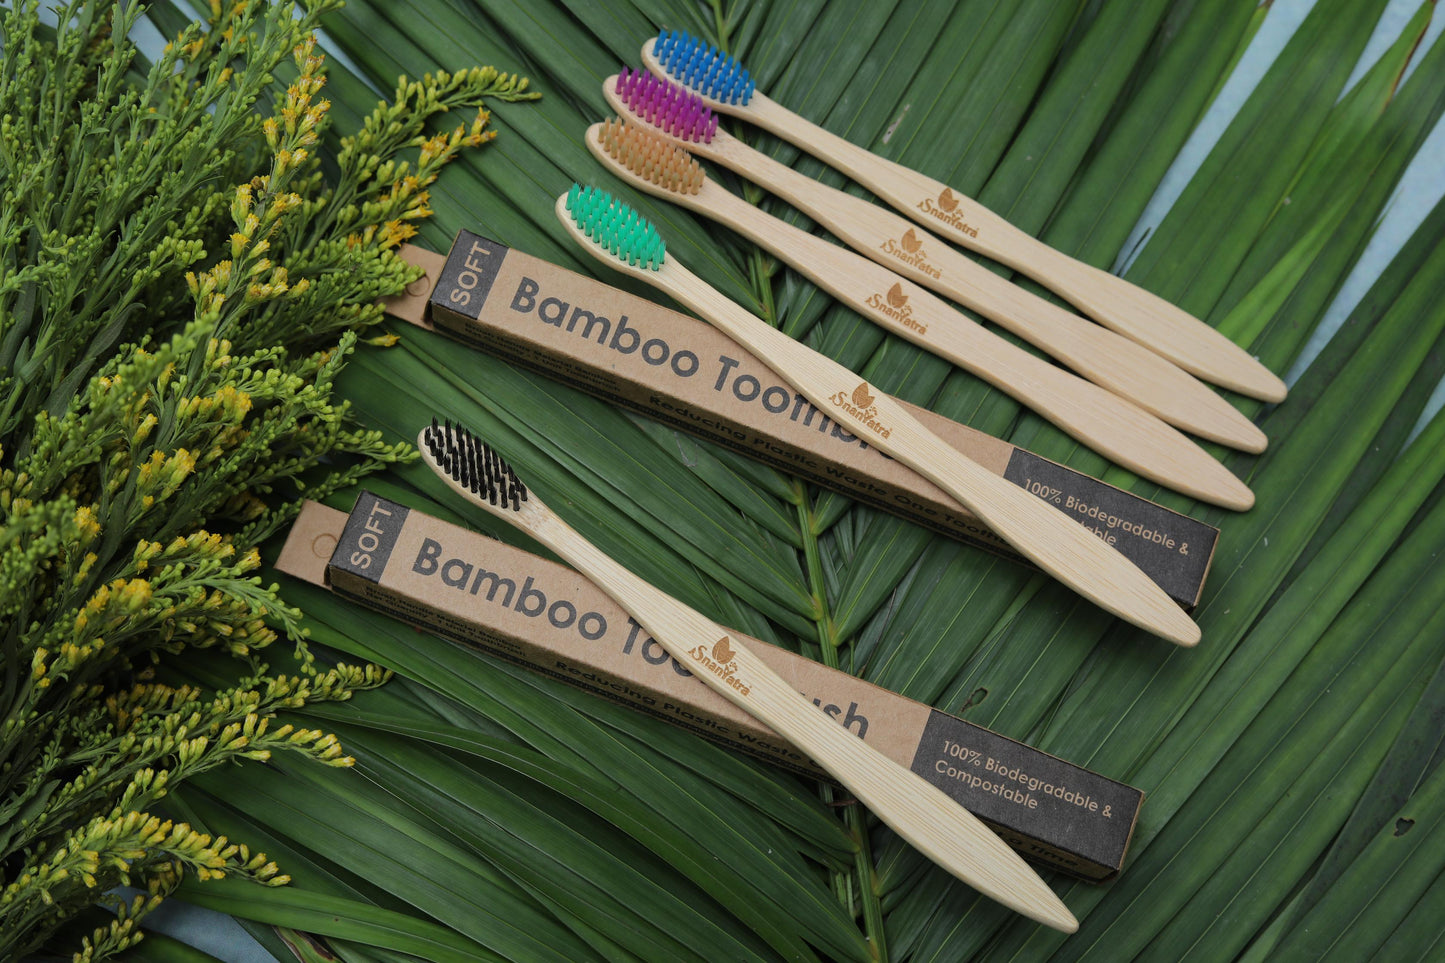 Bamboo Tooth Brush | Combo | Pack of 5